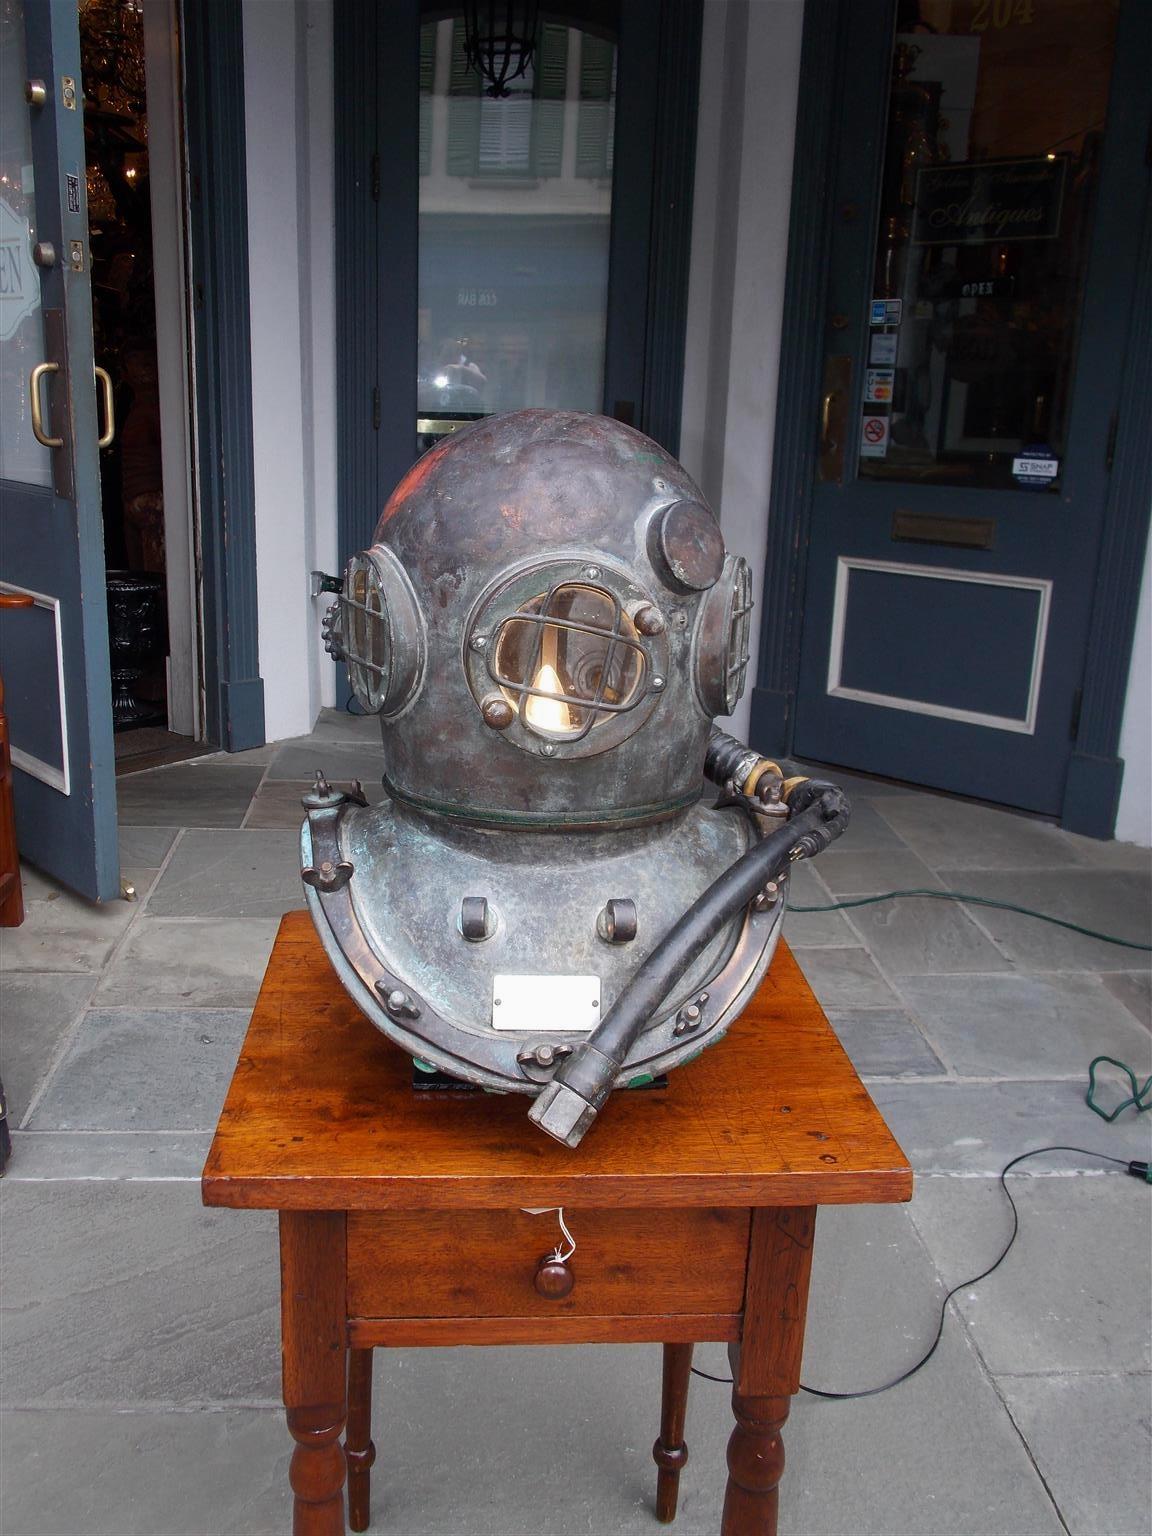 American maritime copper and brass deep sea divers helmet with the original three glass cross hatched windows, latching bonnet, air line intake with hose, and exterior mounted rear ventilator, Early 20th century. Helmet has been electrified on a